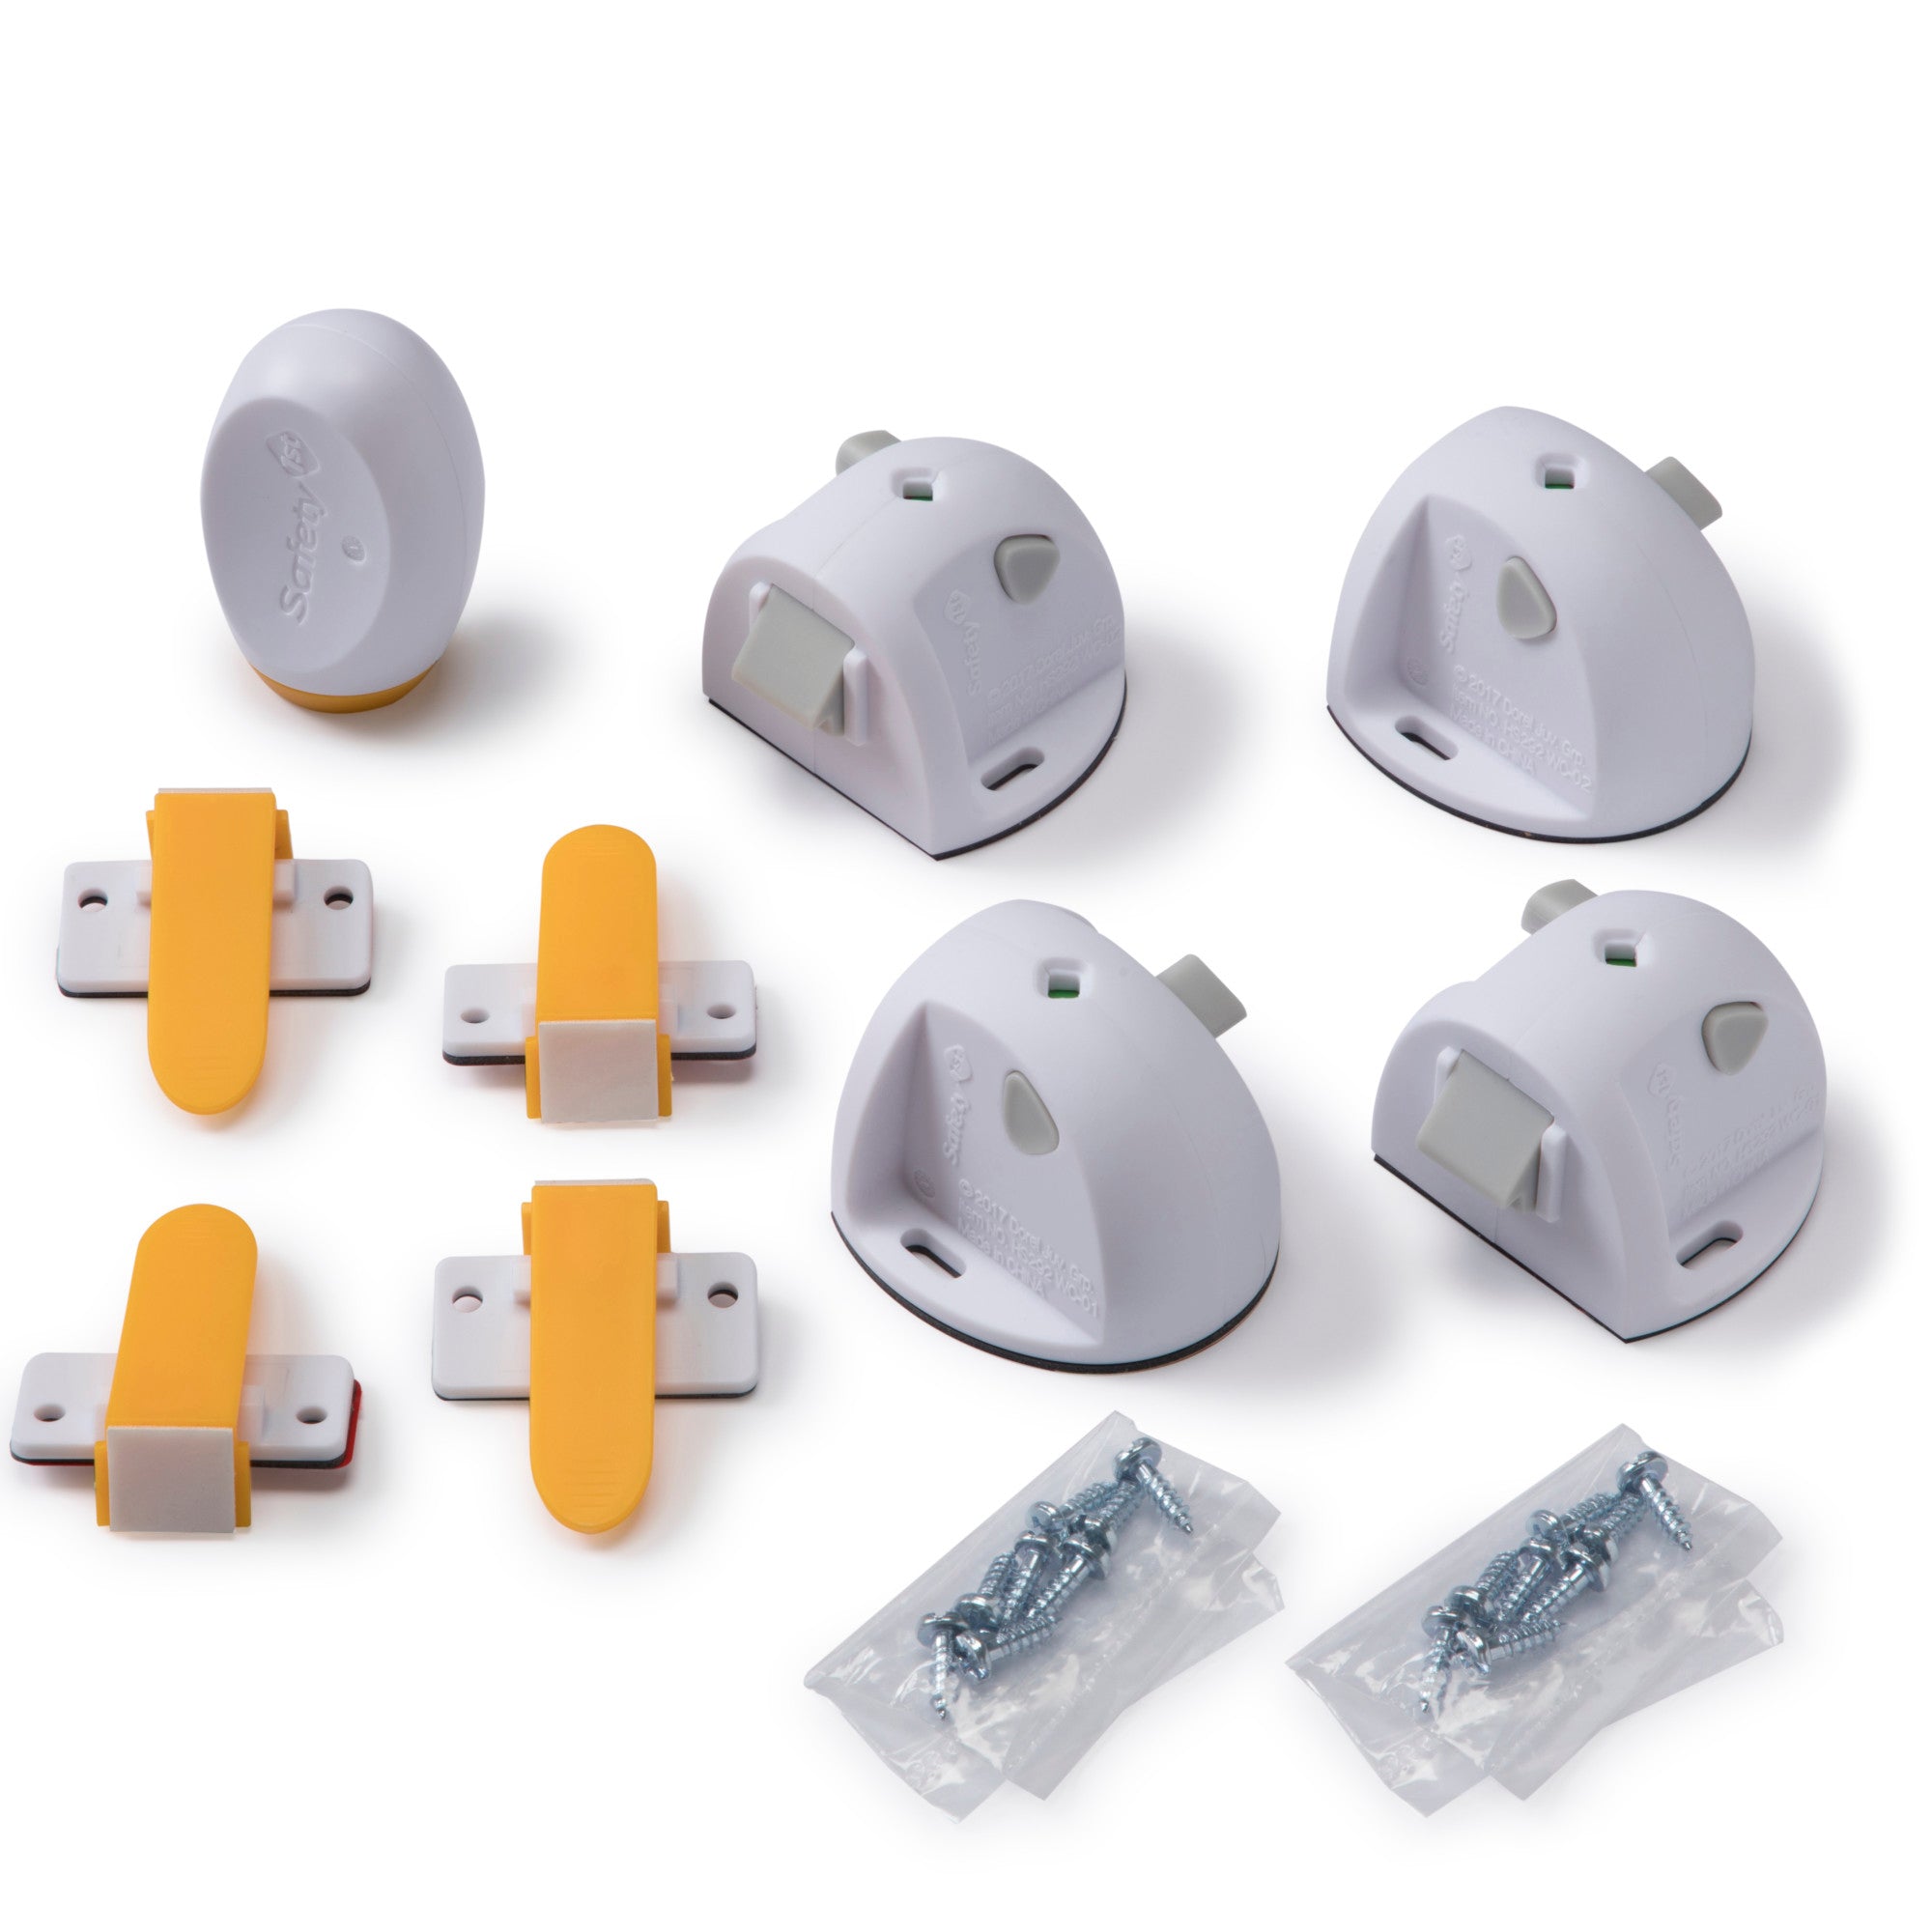 Safety 1st Adhesive Magnetic Lock System 4 Locks and 1 Key in White